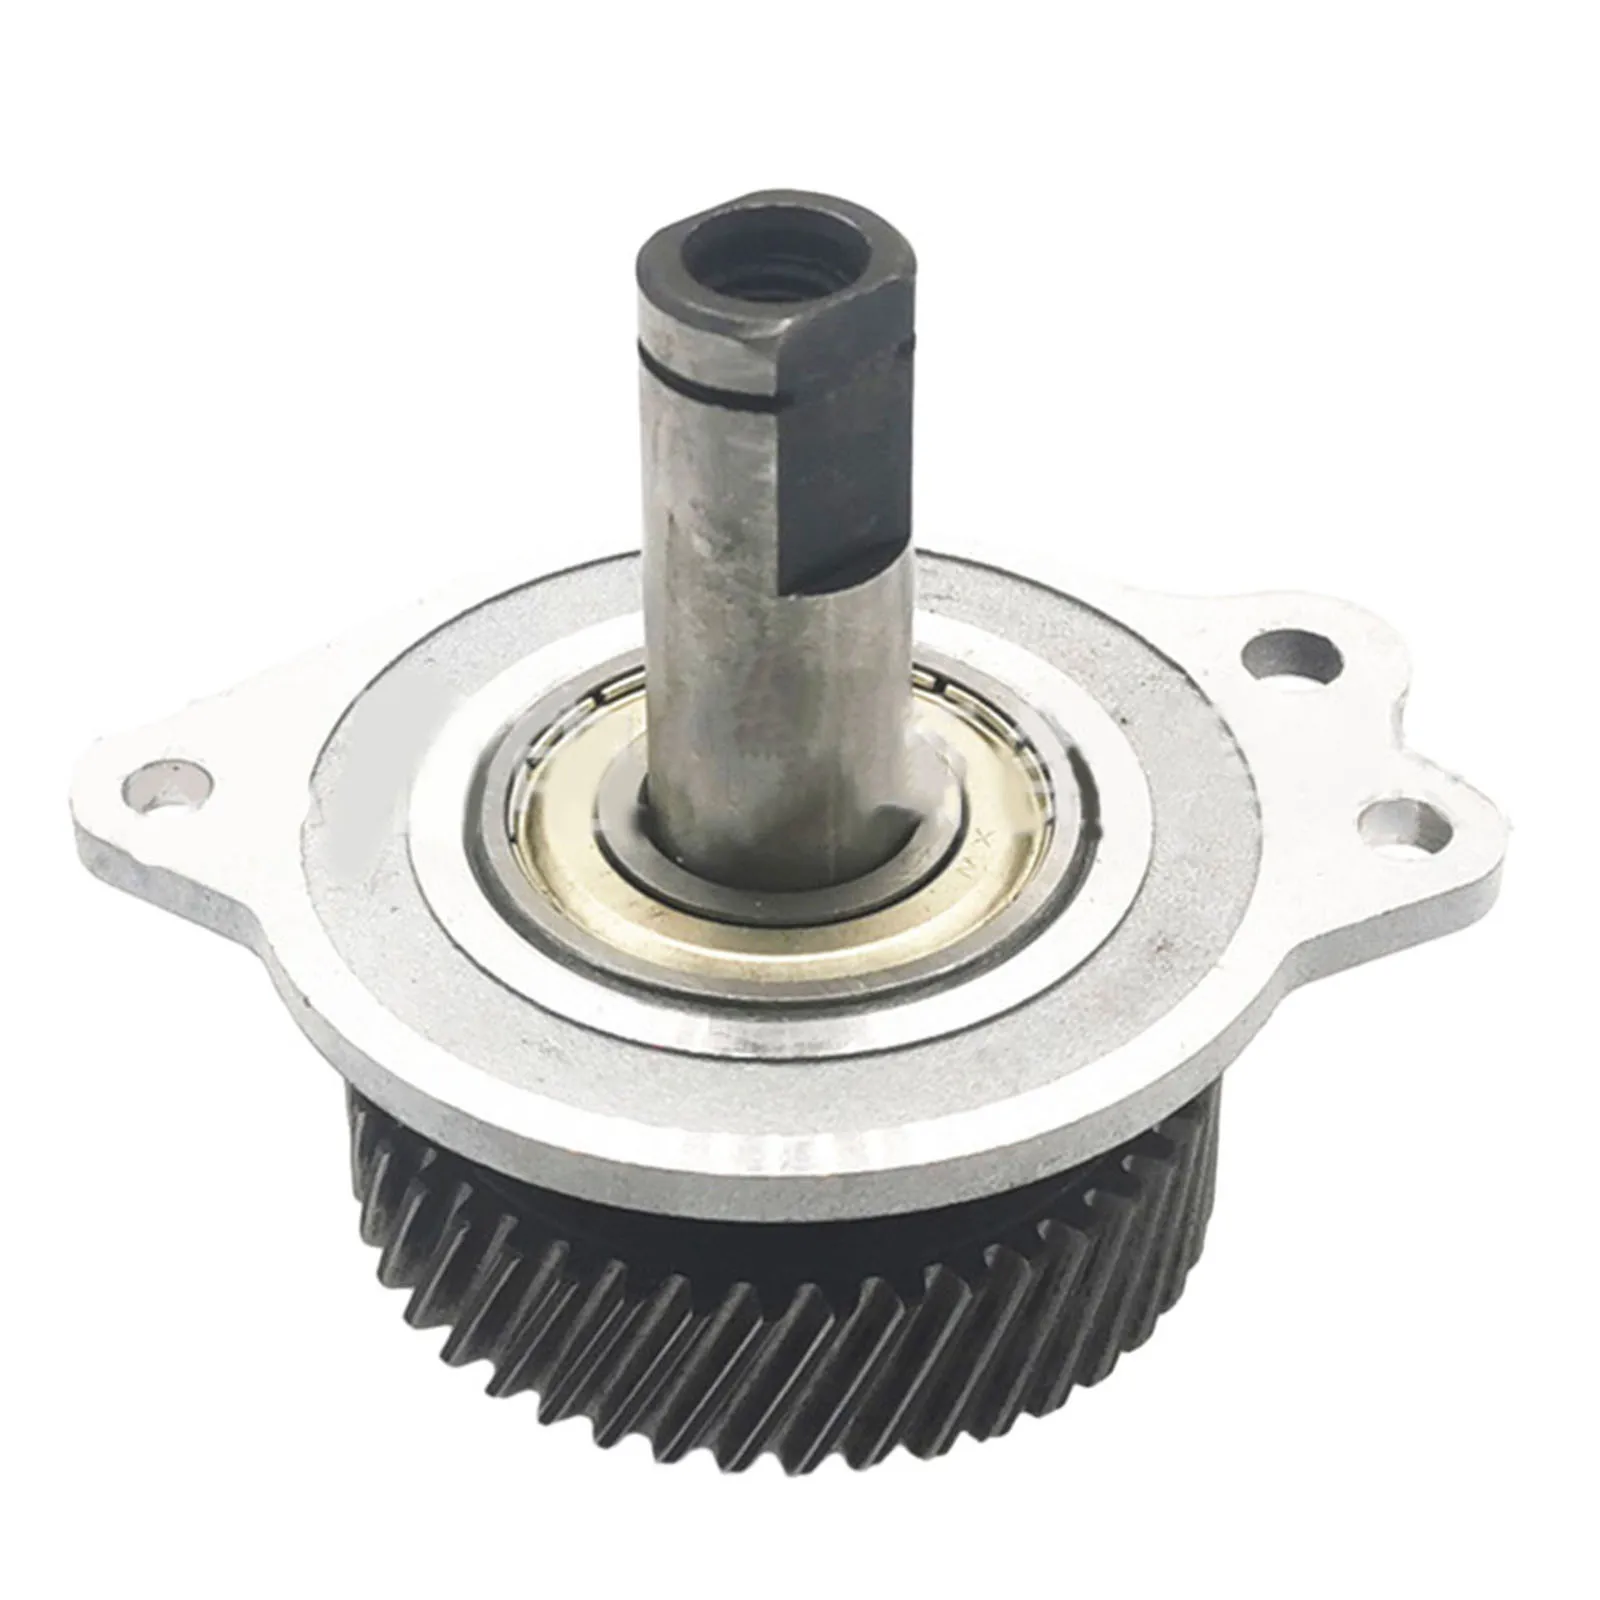 

1pc Spindle FOR METABO CS23-355 CS 23-355 316043710 High Quality Gearbox Power Tool Accessories Electric Tools Parts